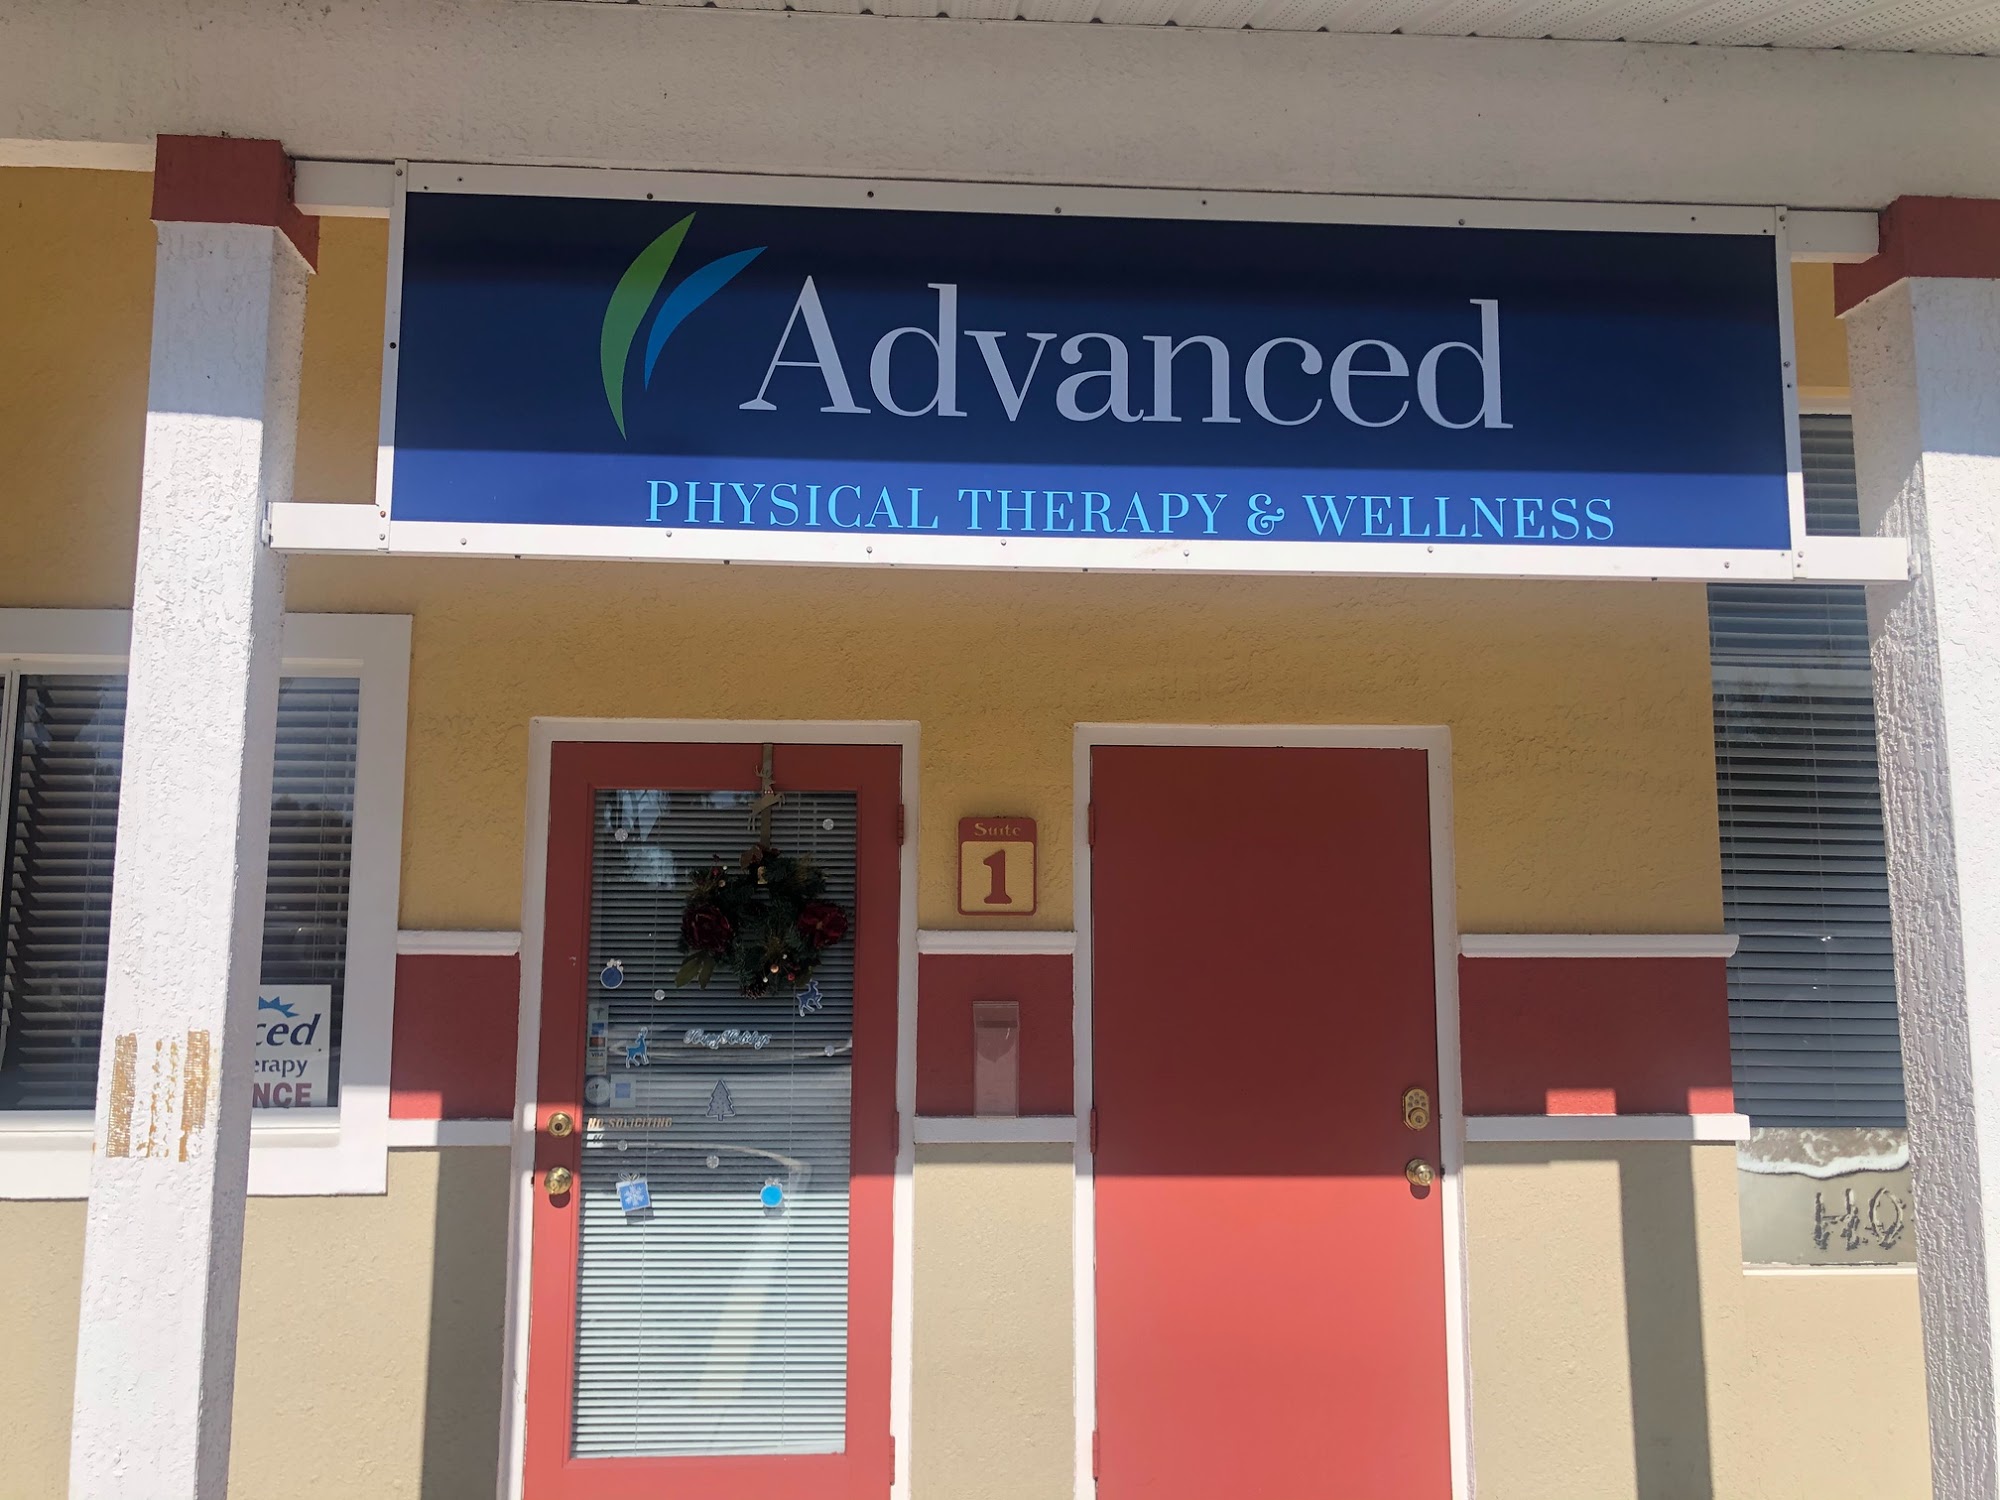 Advanced Physical Therapy & Wellness (APT of Lake County, INC